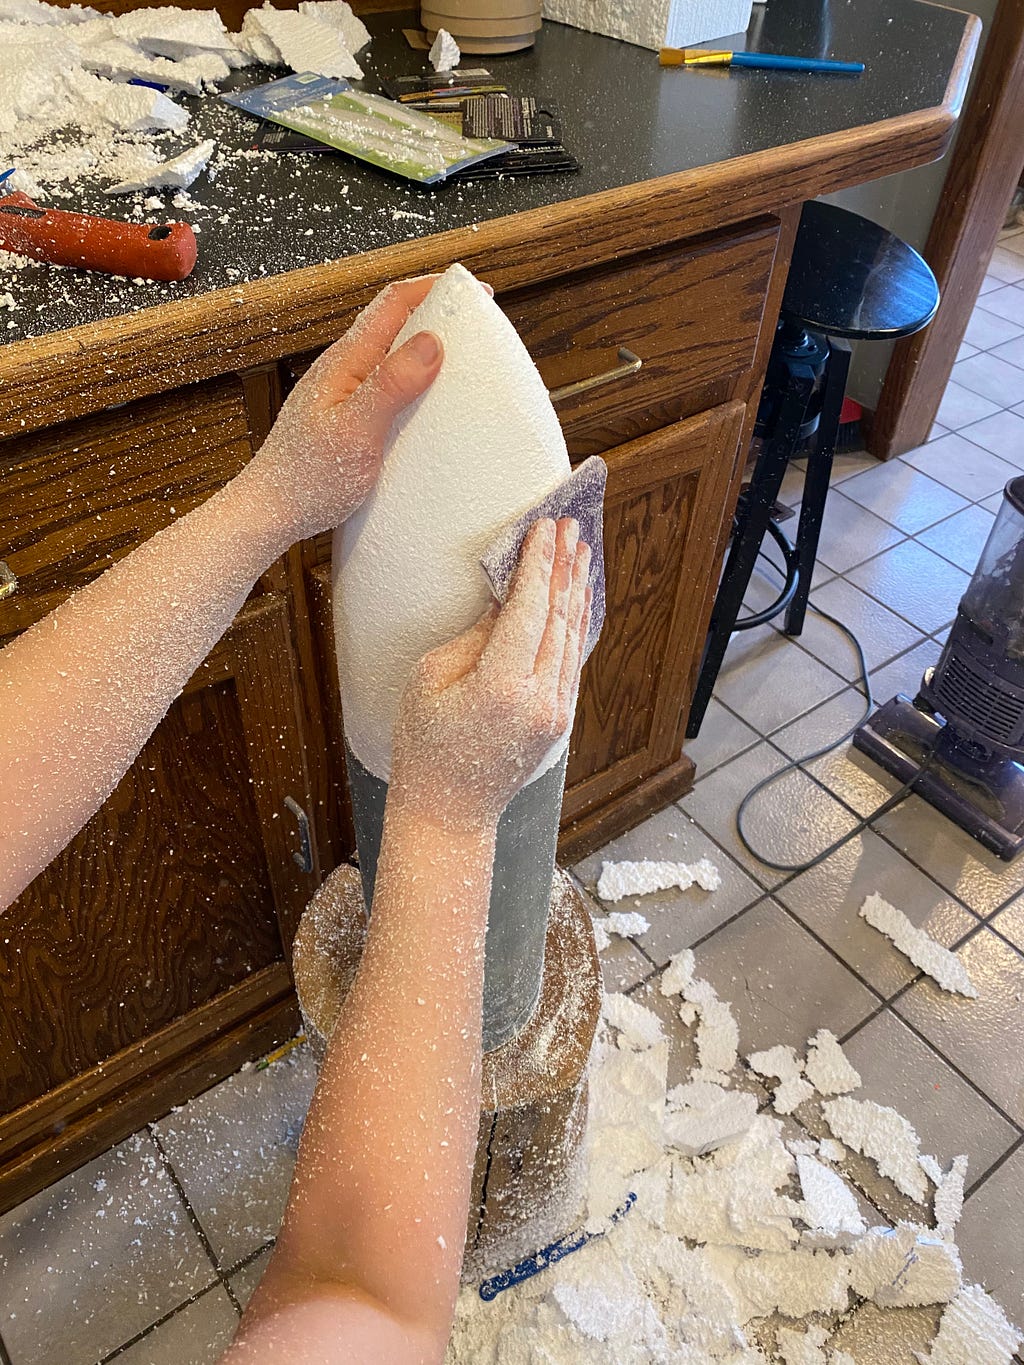 A piece of styrofoam being sanded into the shape of a rocket ship, leaving bits of foam all over the kitchen counters and floor.